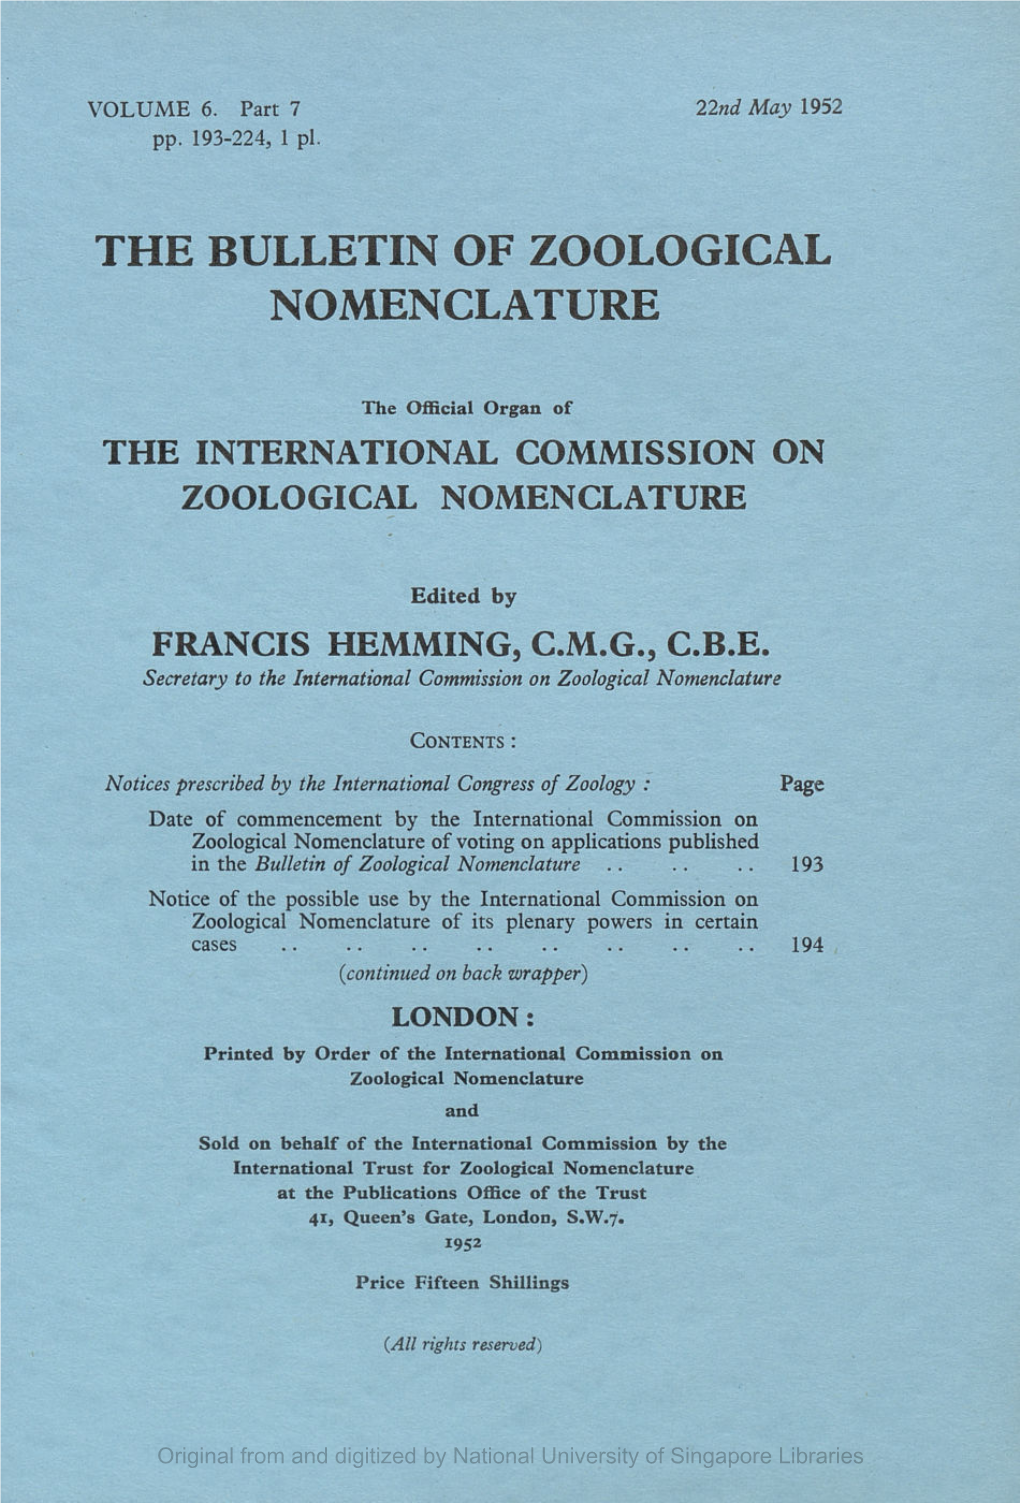 The Bulletin of Zoological Nomenclature. Vol 6, Part 7